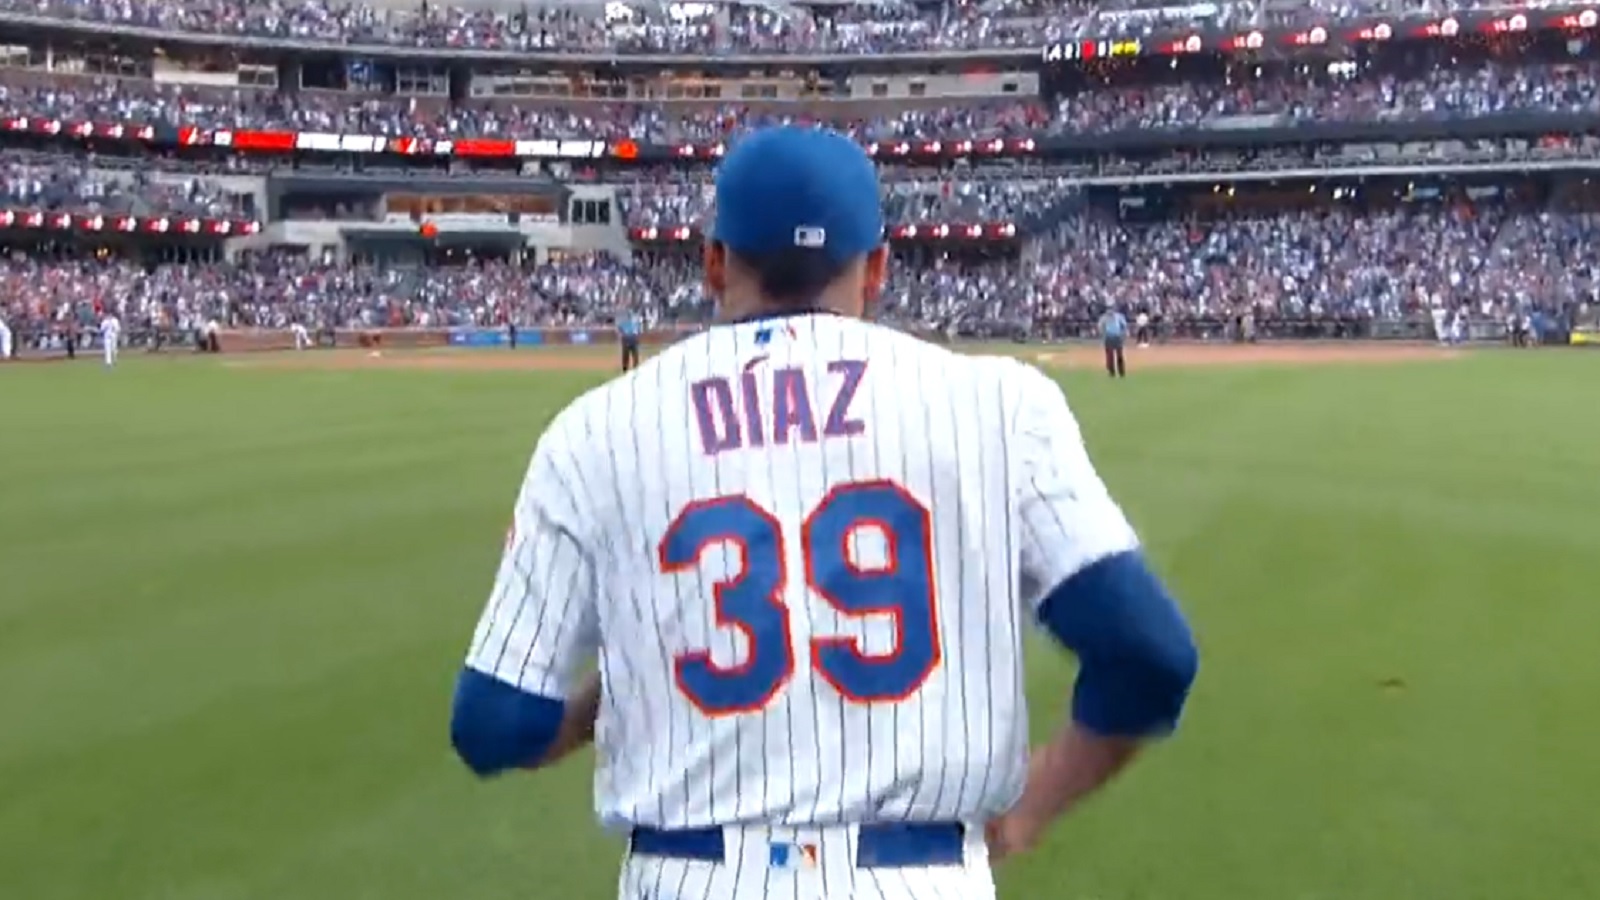 New York Mets closer Edwin Diaz's entrance gets the people going